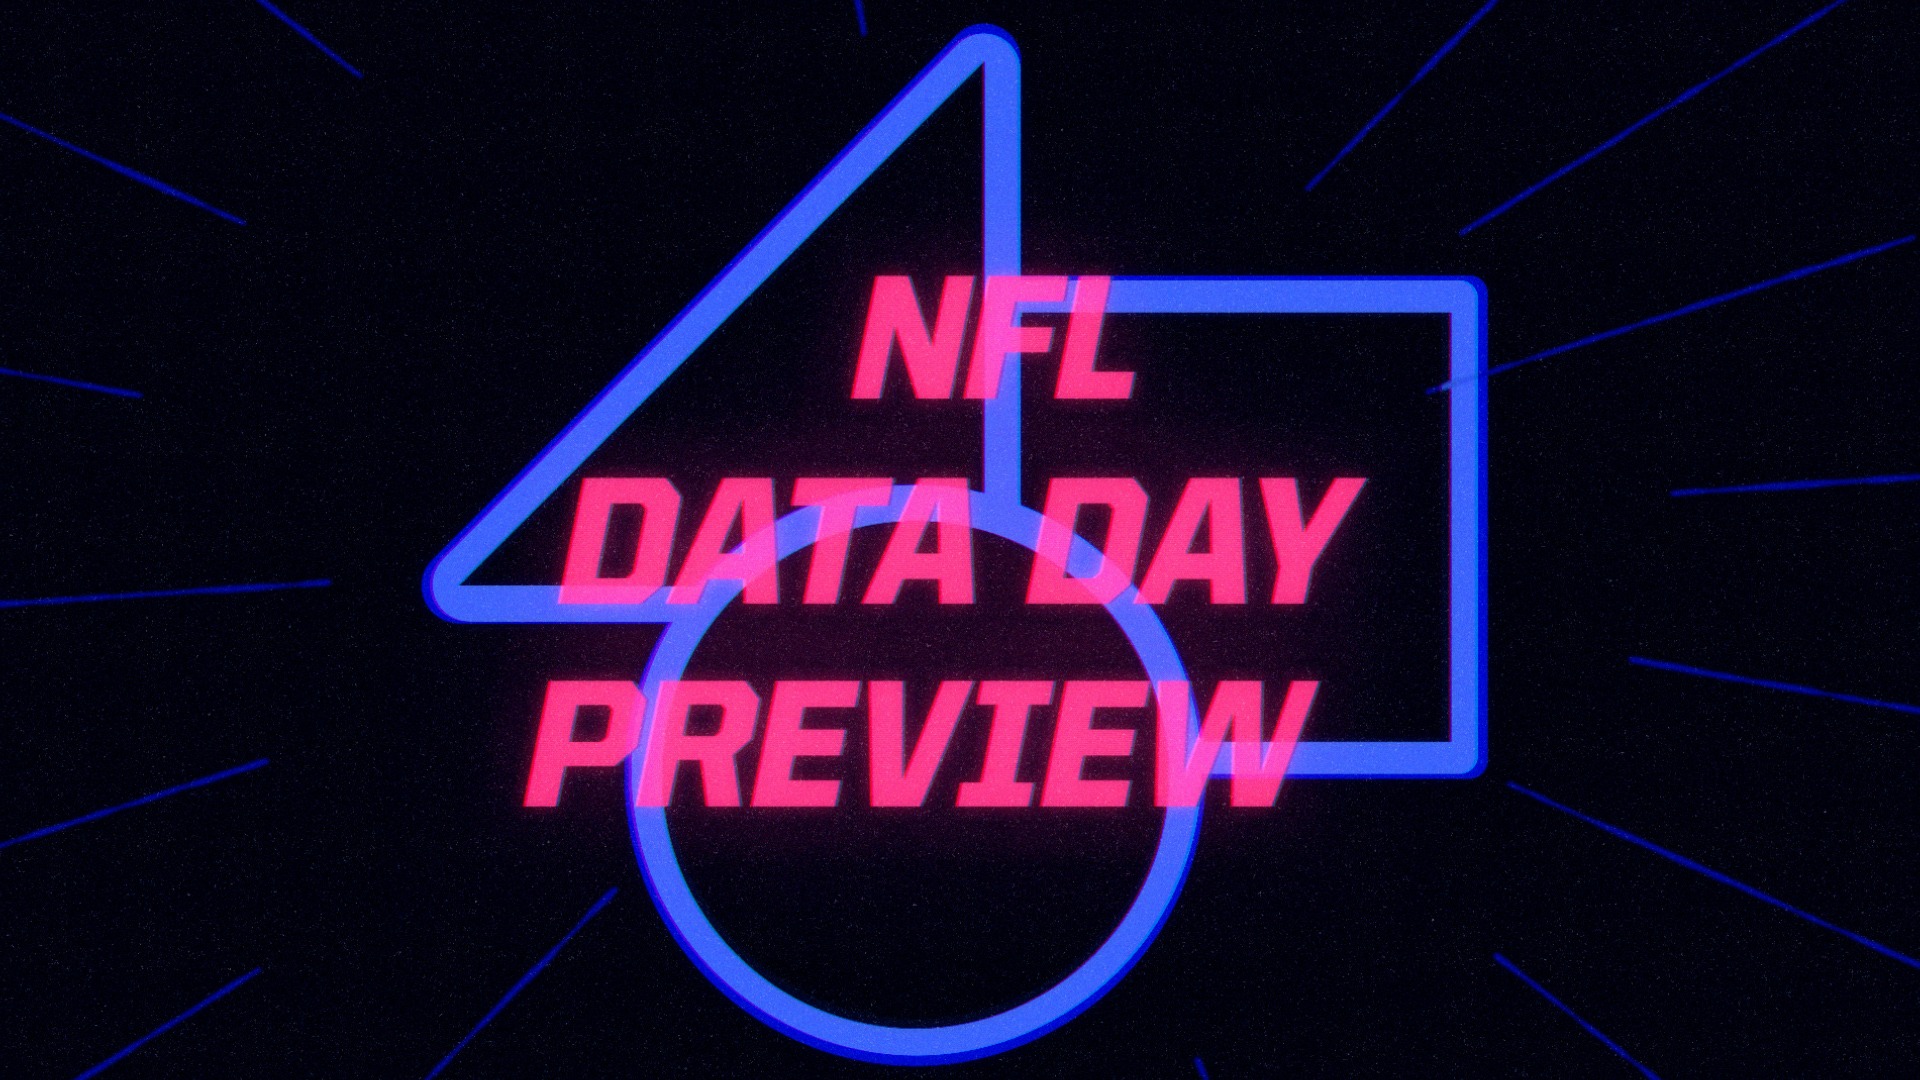 NFL Week 10 Preview | The Data Day